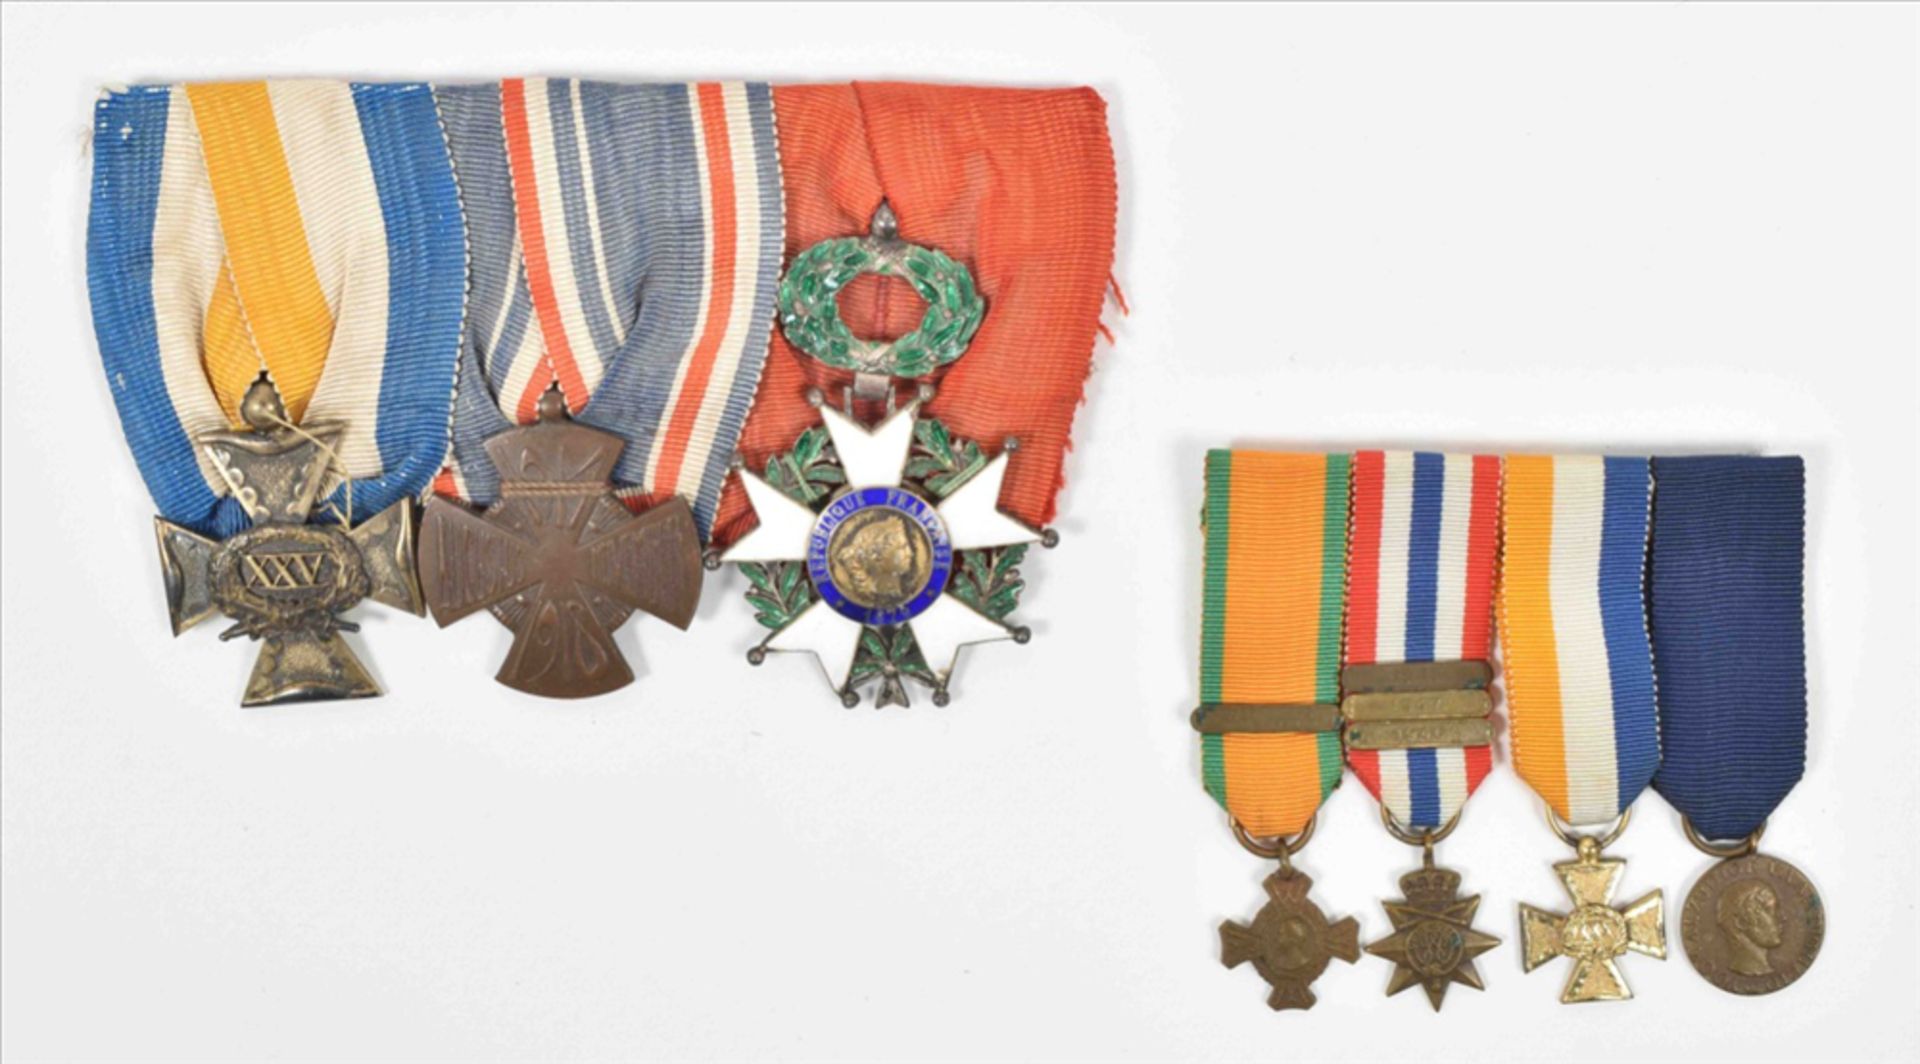 [Medals] Collection of seven Dutch military medals